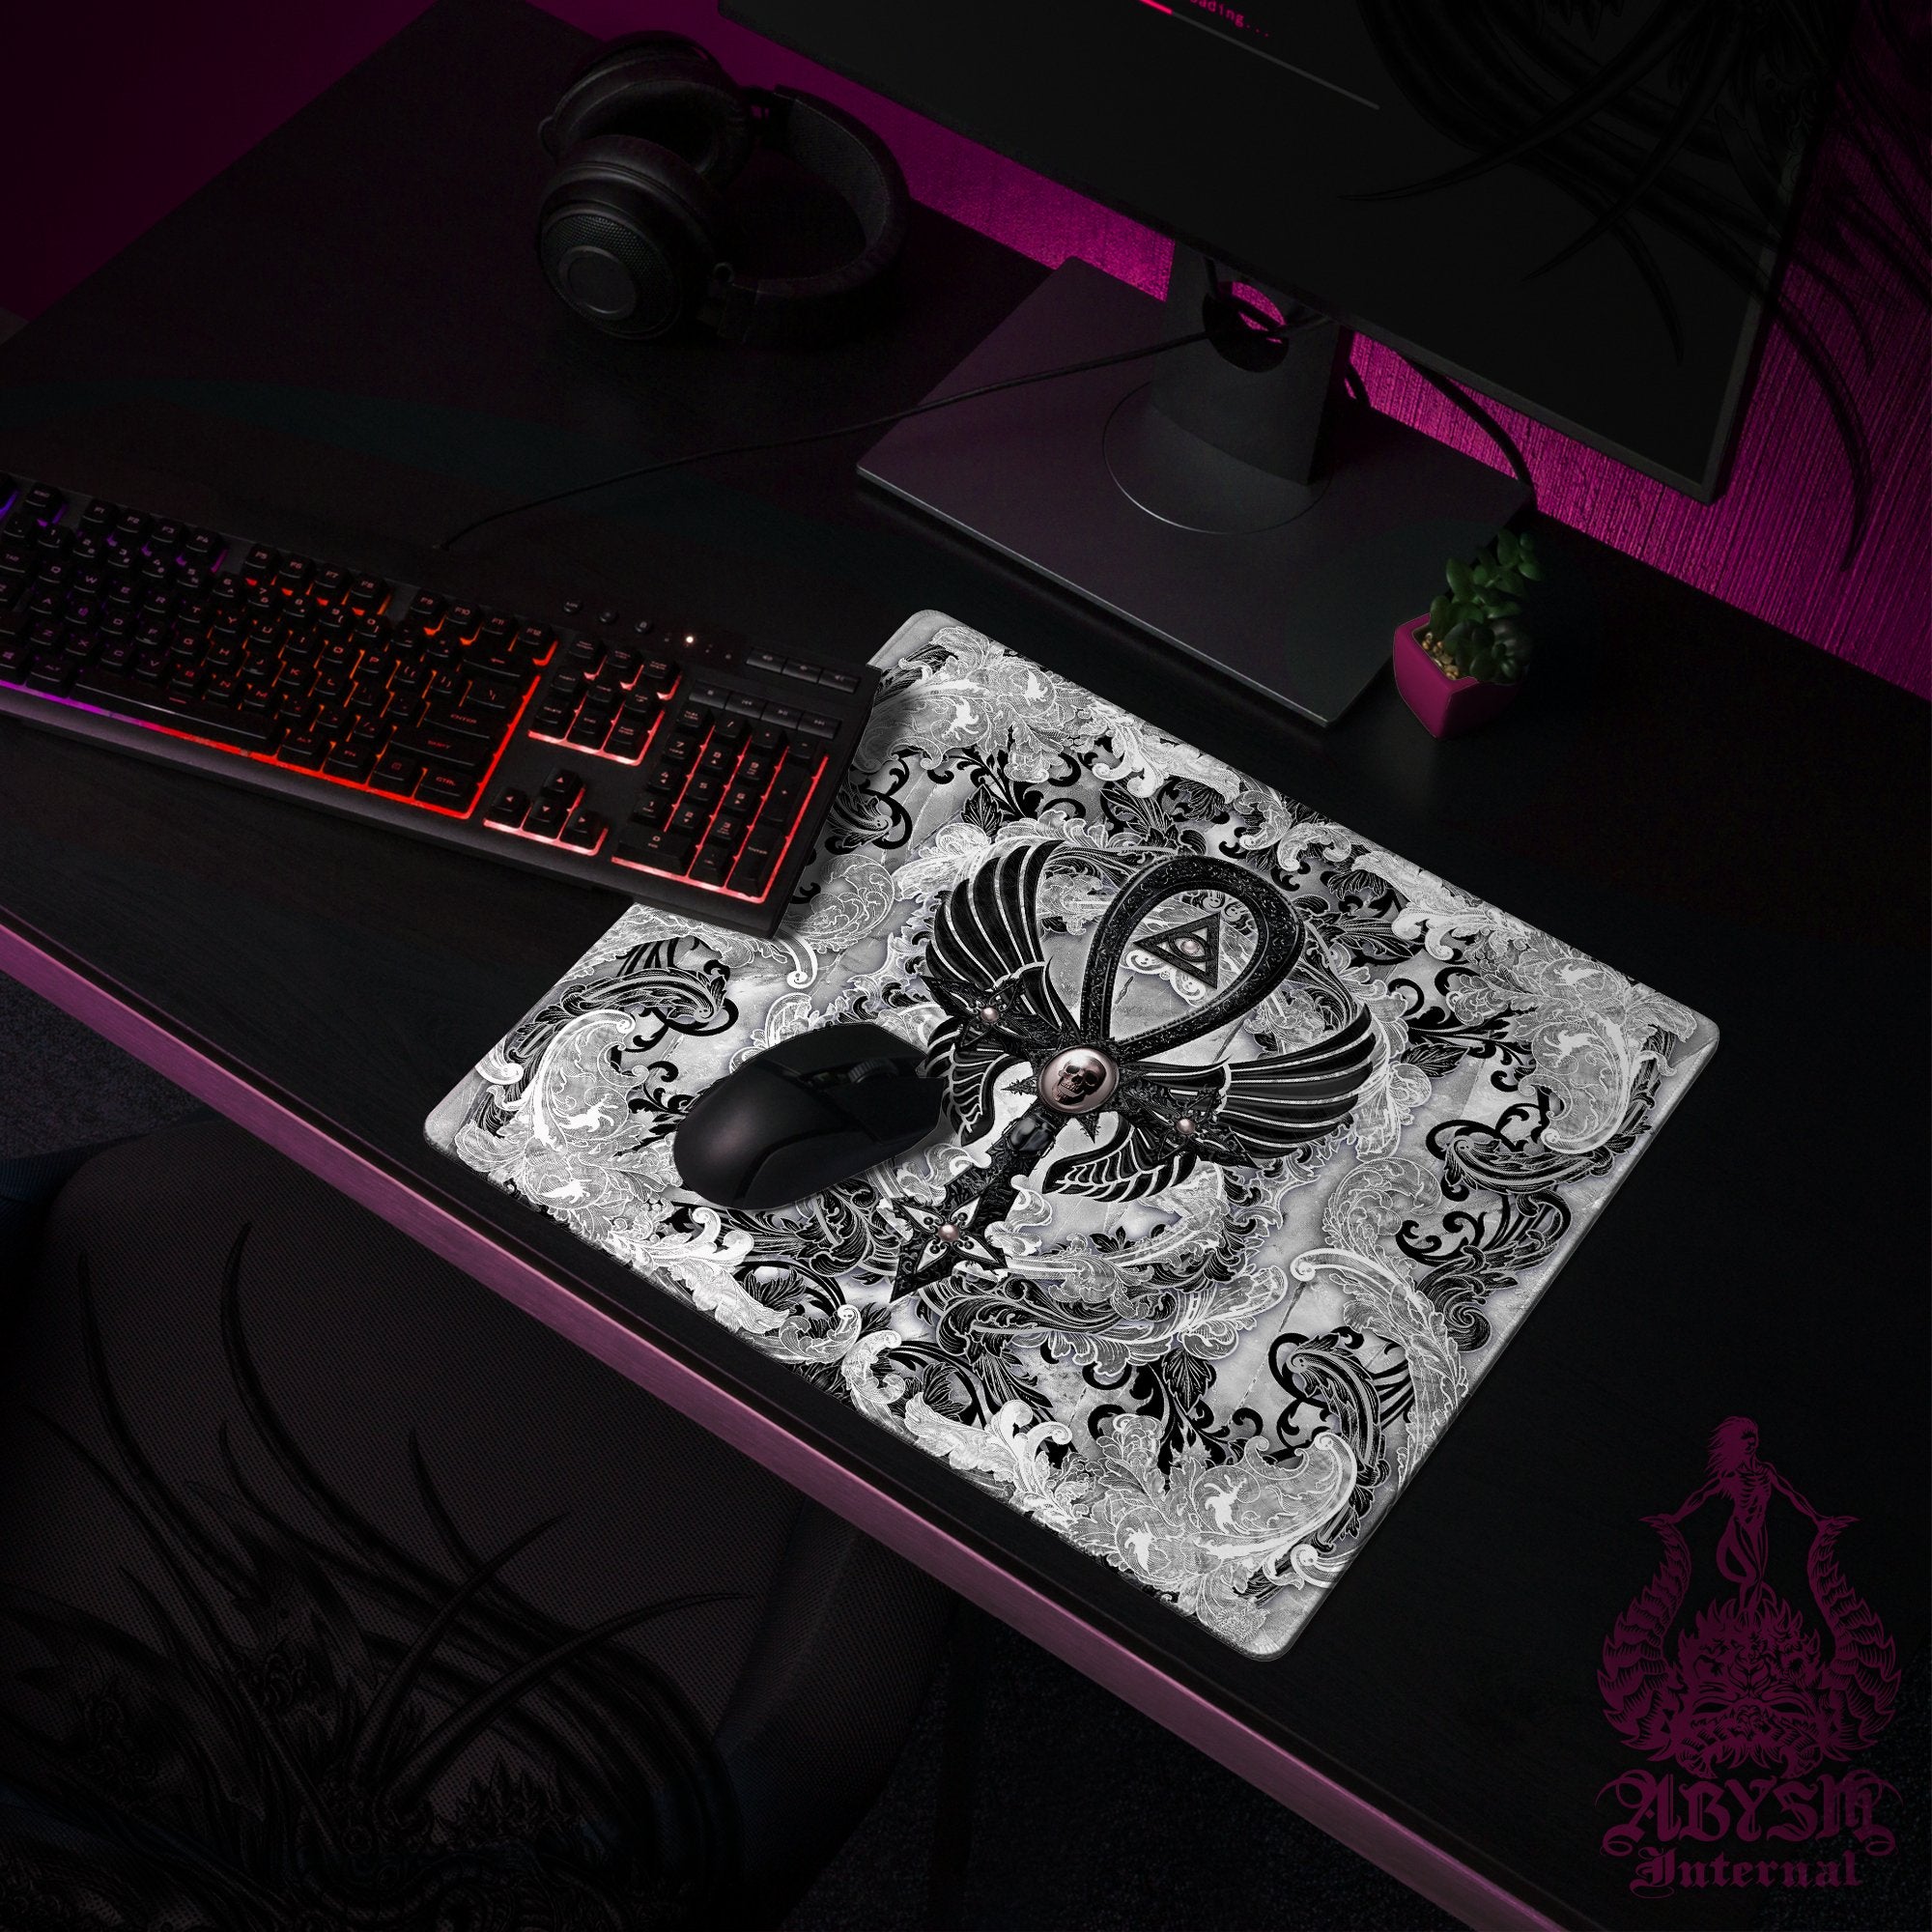 White Goth Workpad, Black Ankh Desk Mat, Gaming Mouse Pad, Cross Table Protector Cover, Skull Art Print - Abysm Internal